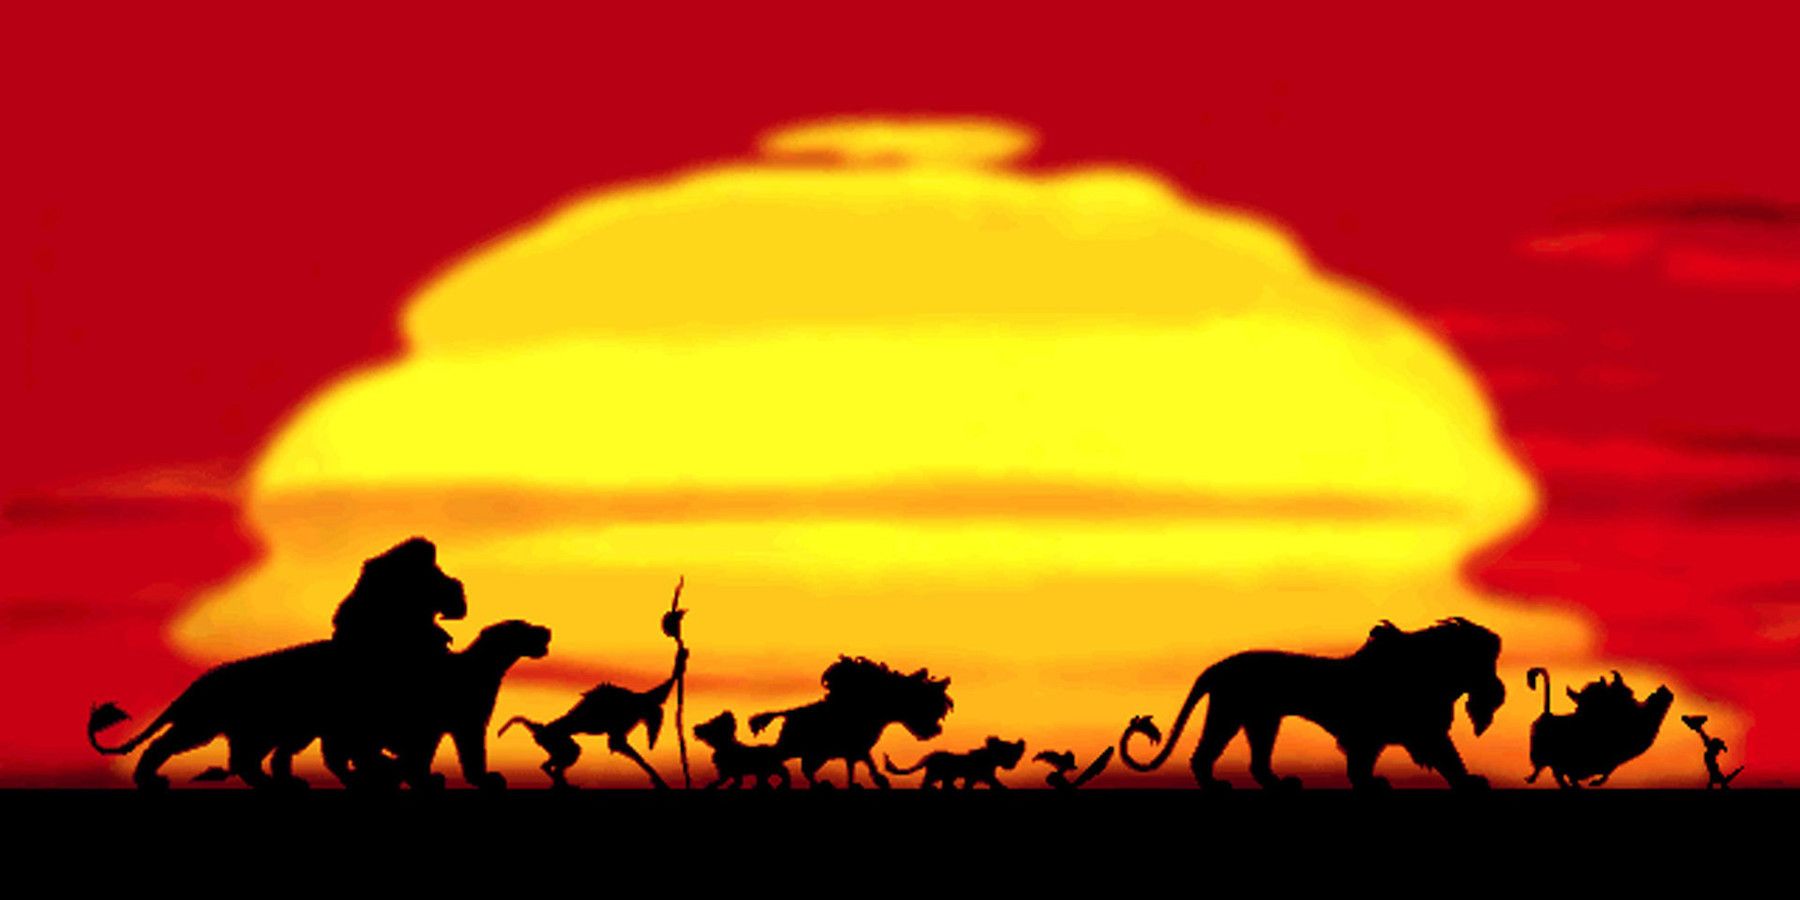 Lion King Cast in the Sun